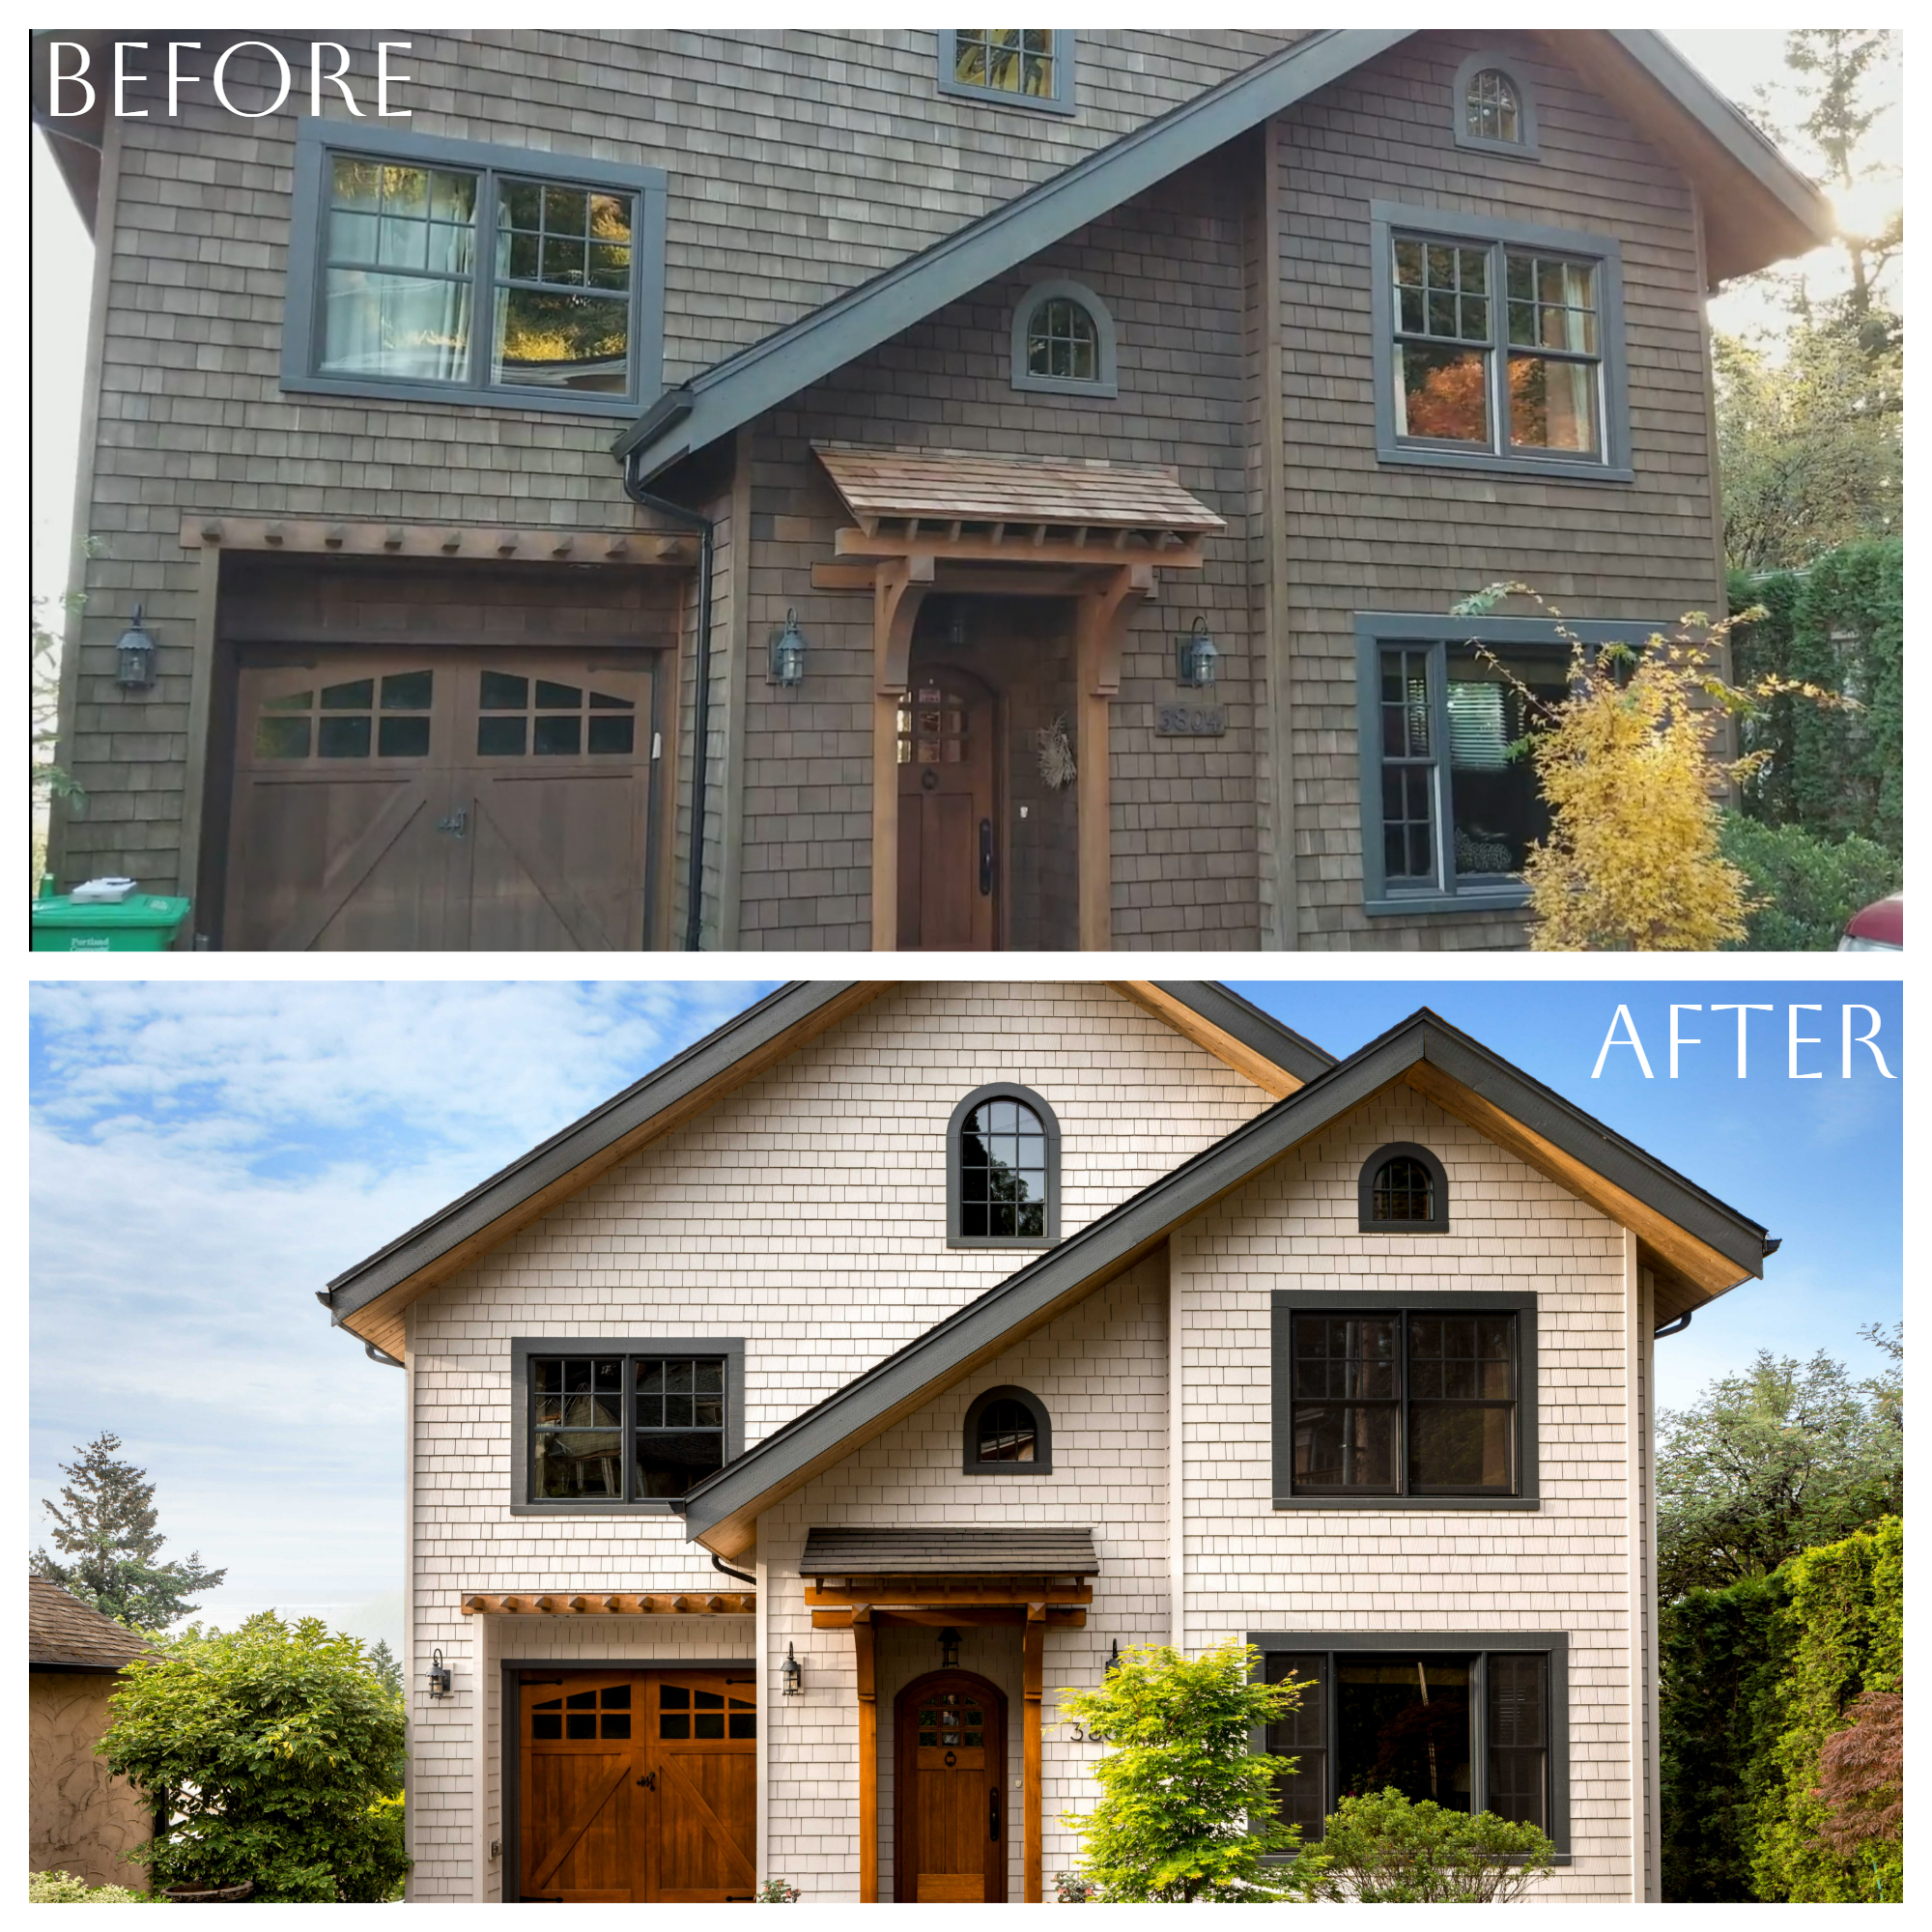 A spot the exterior painting transformation of a house, before and after summer 2023.